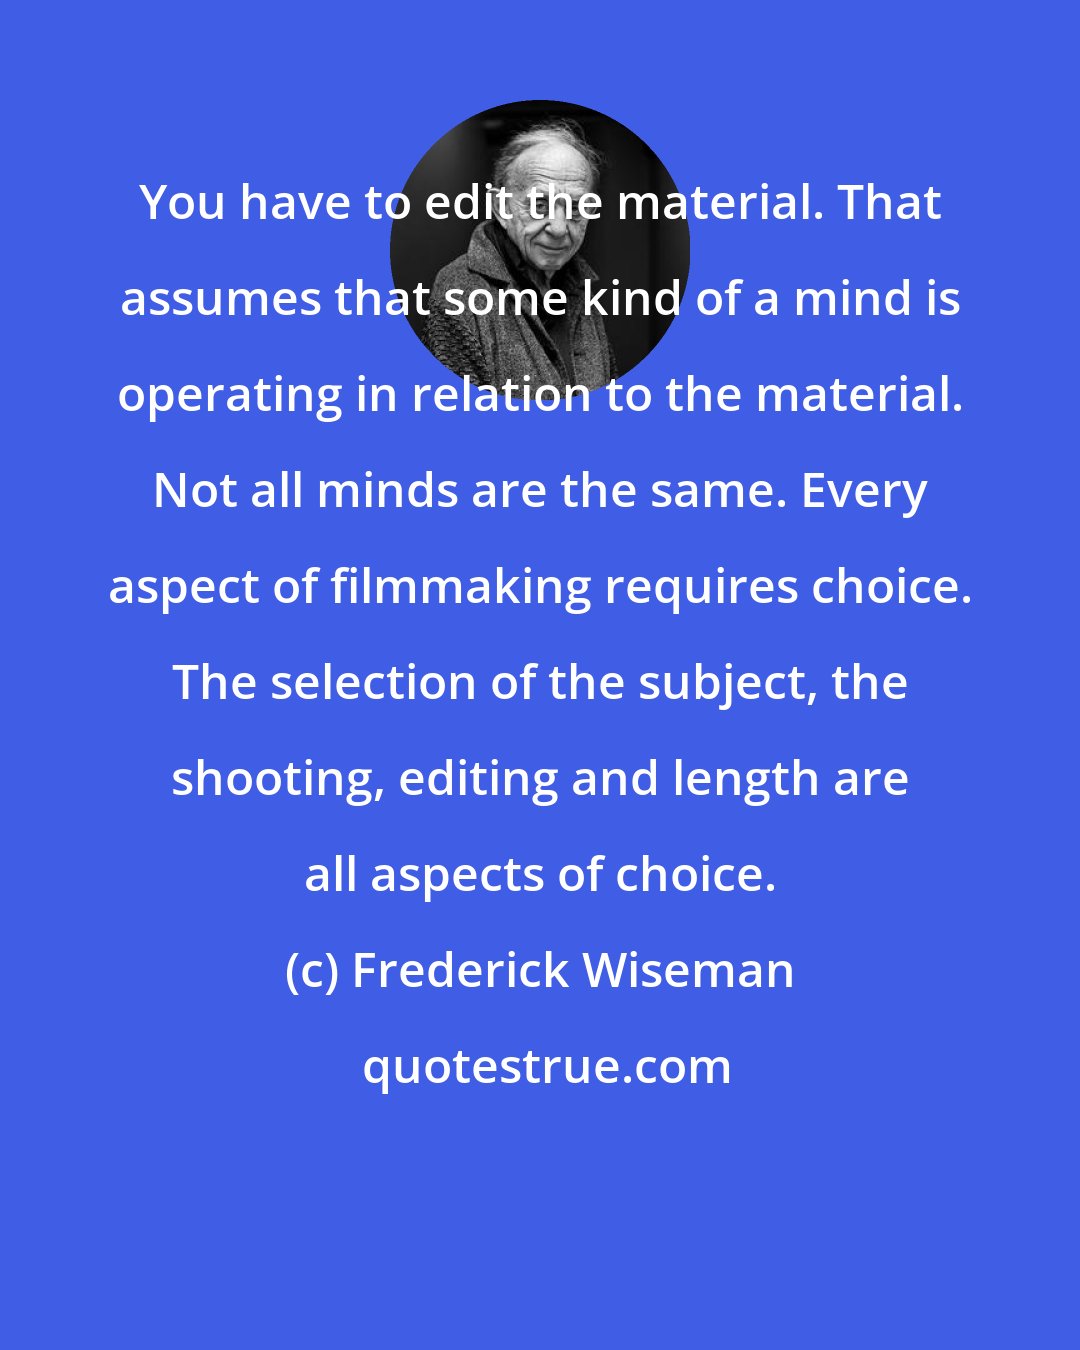 Frederick Wiseman: You have to edit the material. That assumes that some kind of a mind is operating in relation to the material. Not all minds are the same. Every aspect of filmmaking requires choice. The selection of the subject, the shooting, editing and length are all aspects of choice.